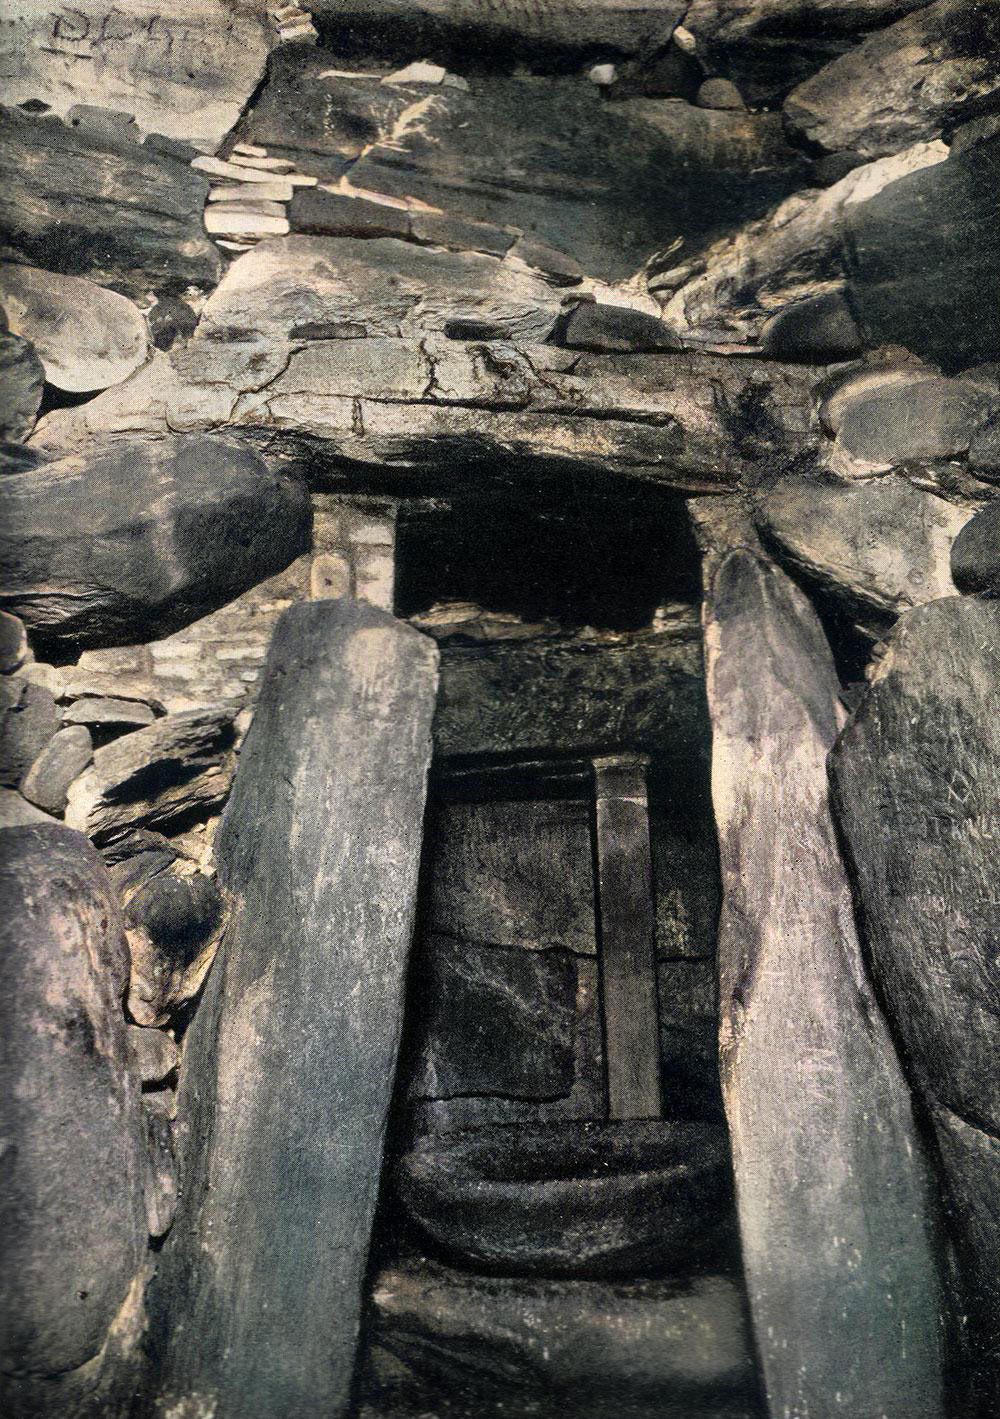 An early photograph of the chamber of Newgrange.